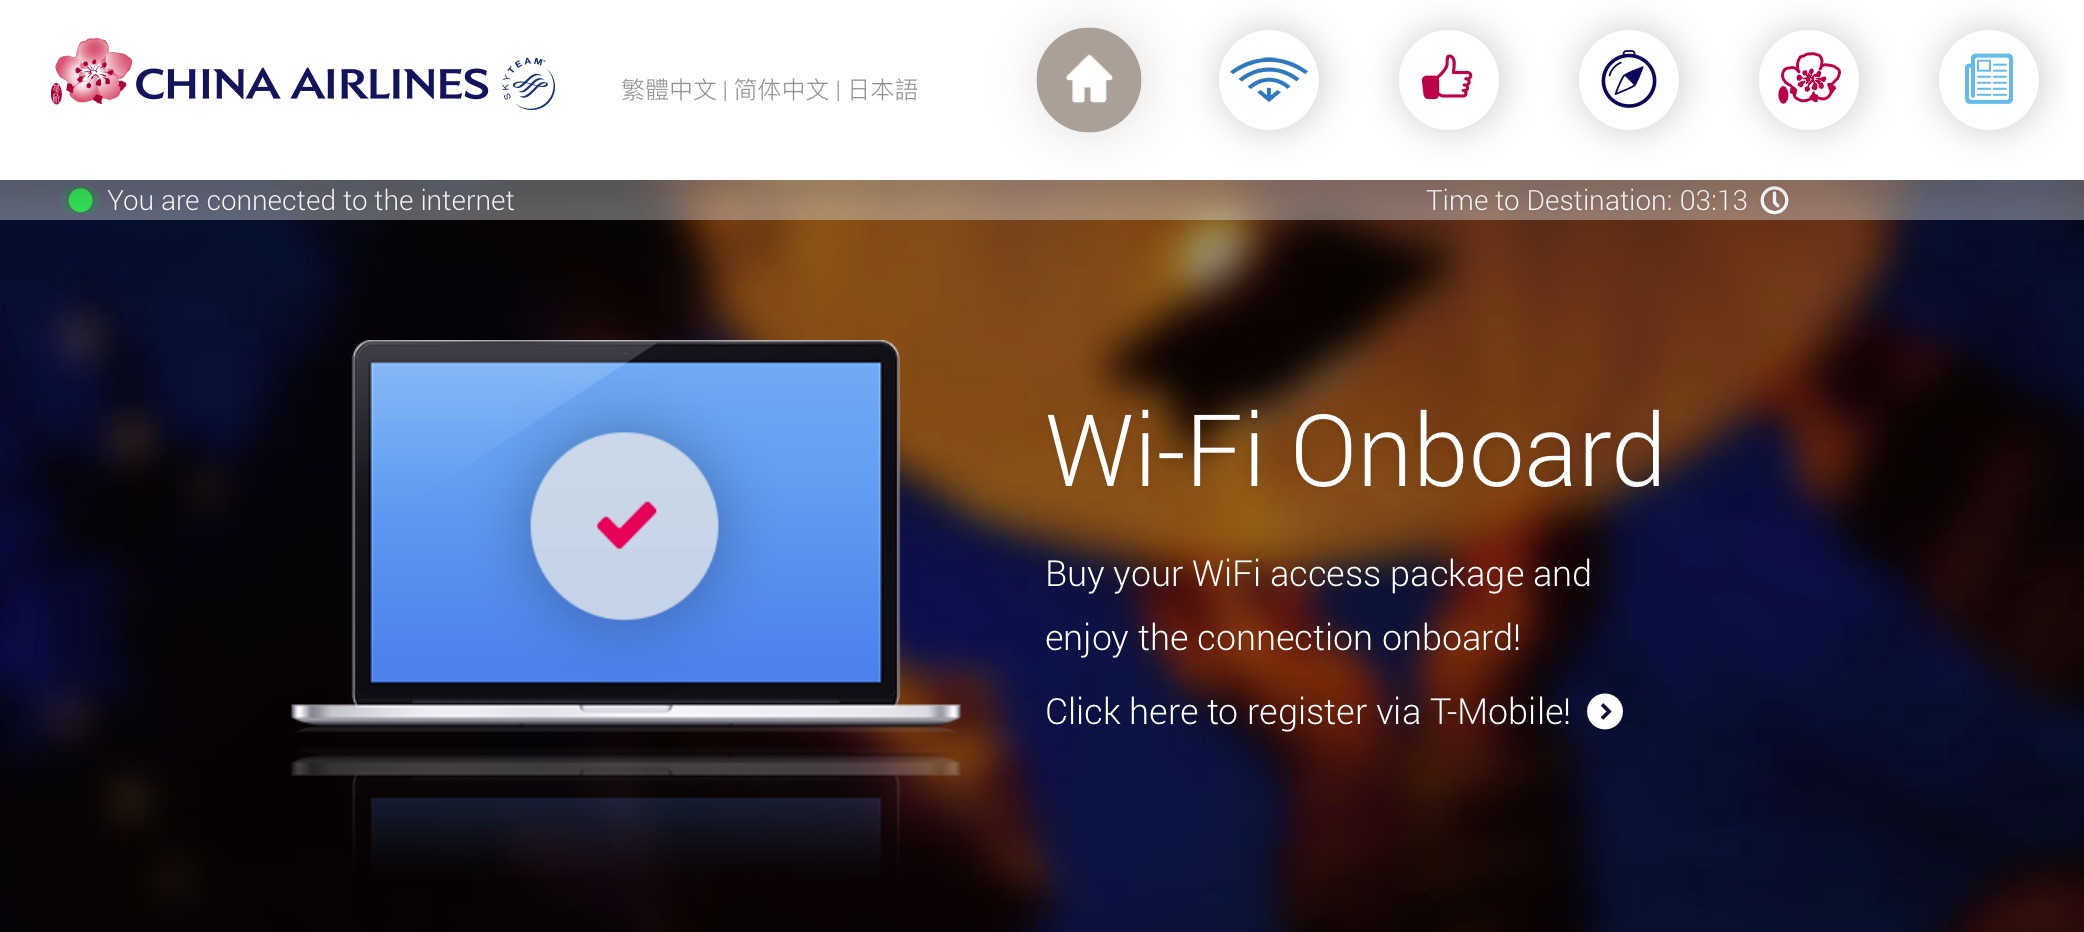 China Airlines Wifi Internet 02